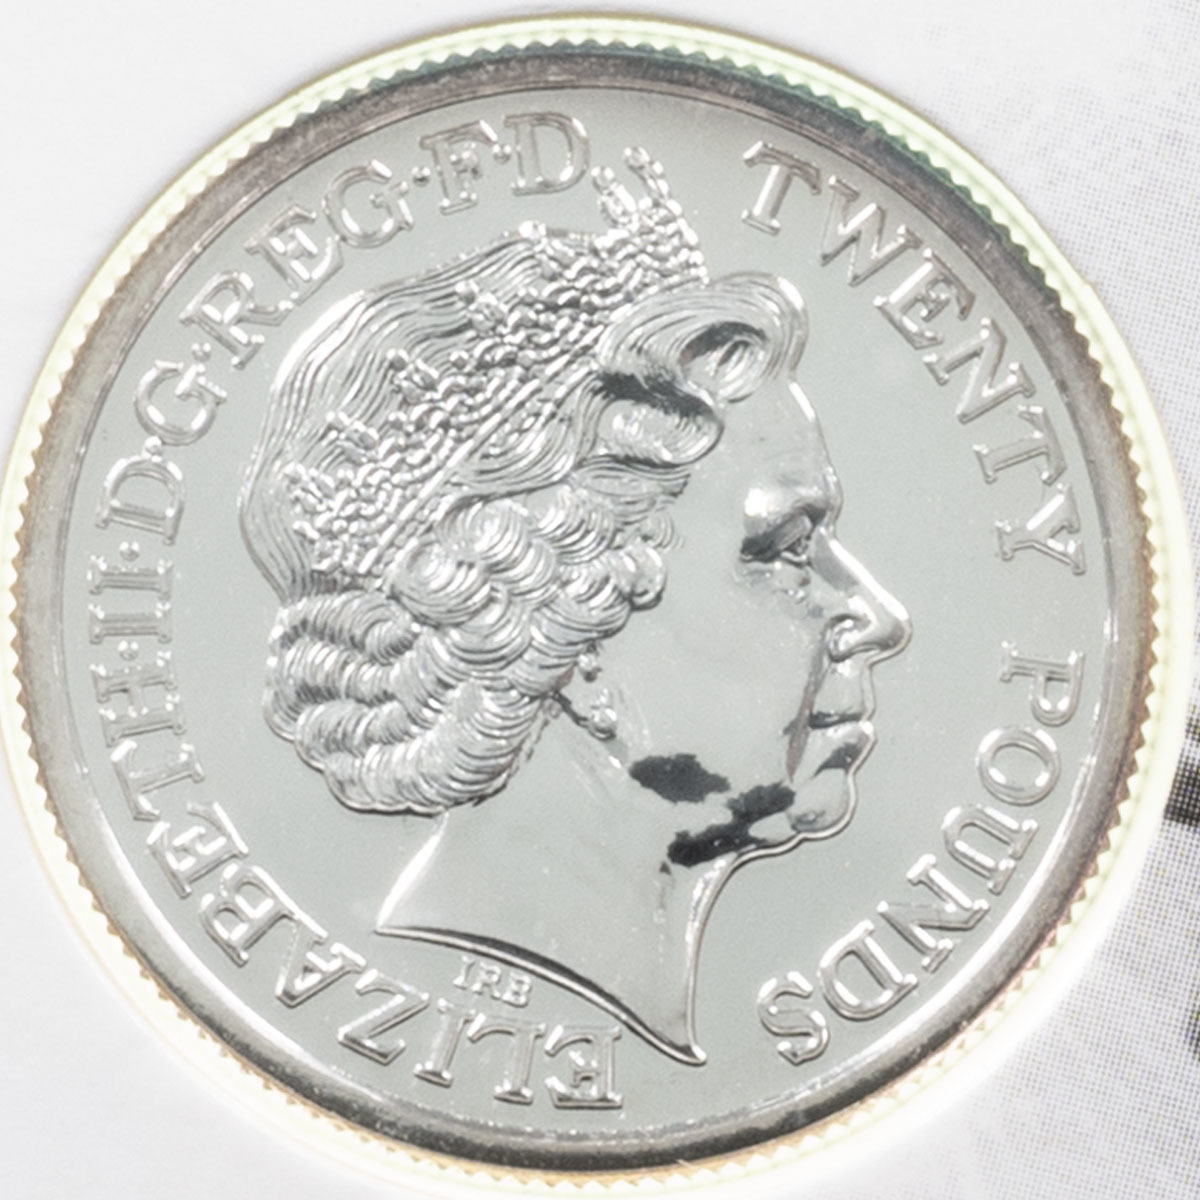 UK13FVS 2013 Saint George And The Dragon Sovereign Benedetto Pistrucci Twenty Pound Silver Brilliant Uncirculated Coin In Folder Obverse